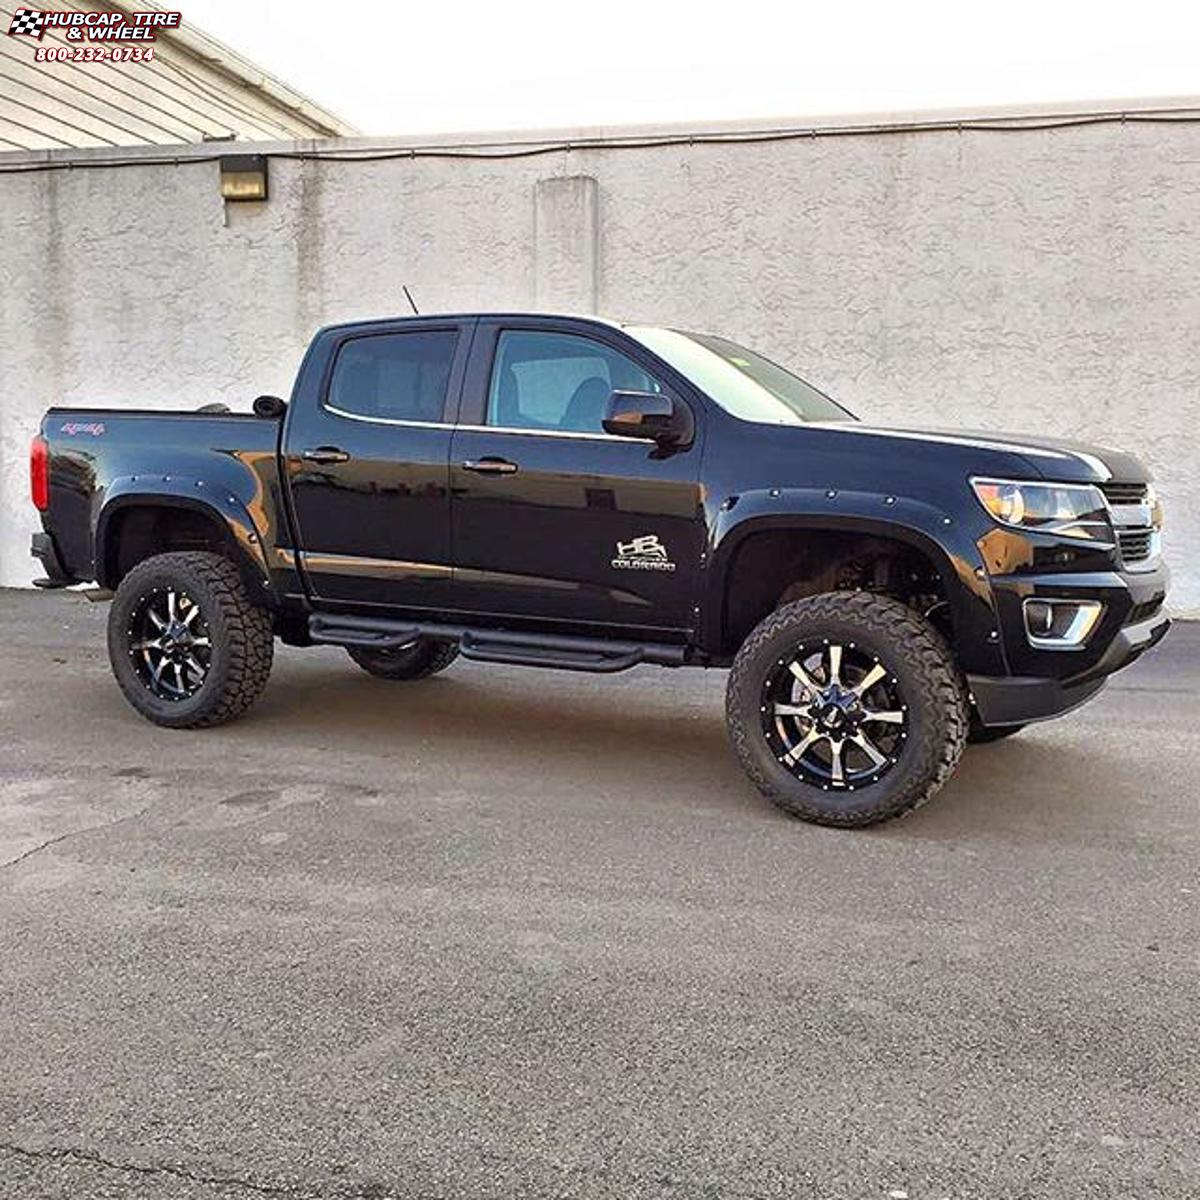 vehicle gallery/2016 chevrolet colorado moto metal mo970  Gloss Black Machined Face wheels and rims